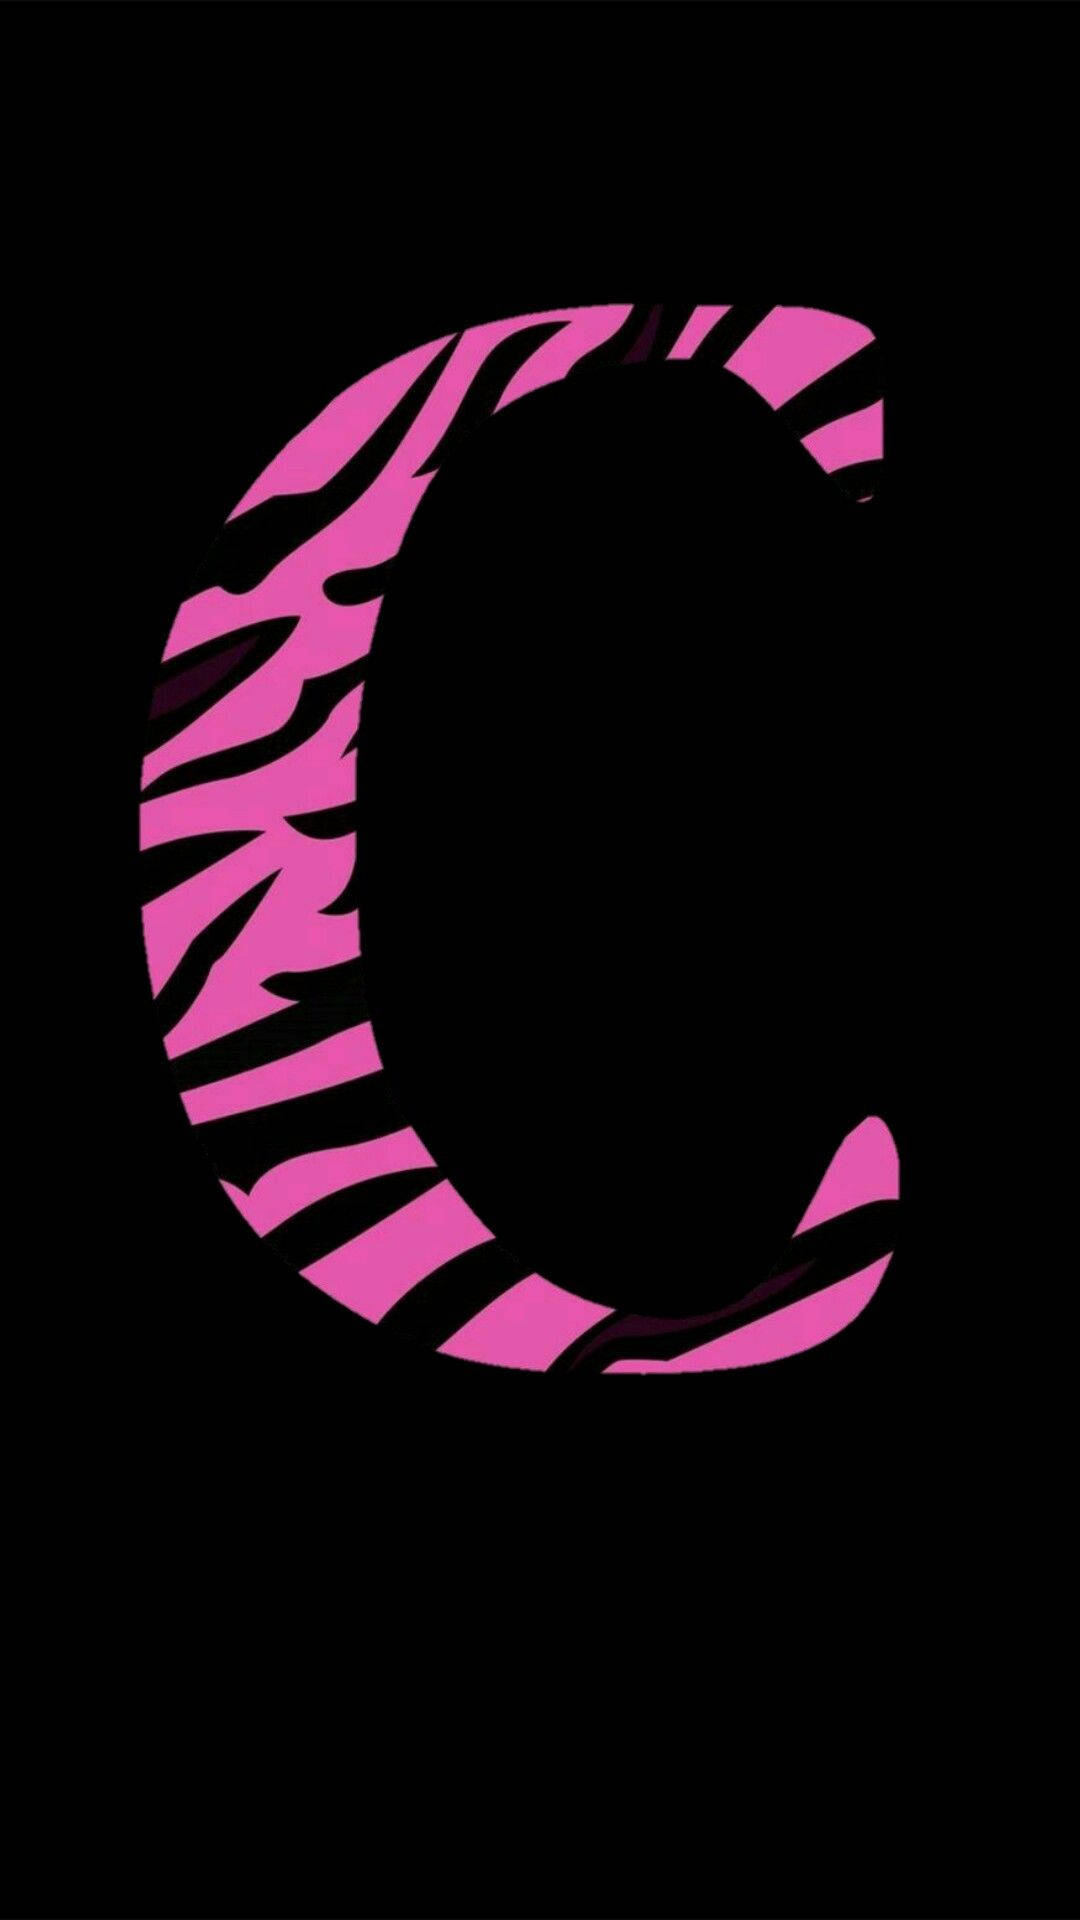 Letter C With Zebra Pattern